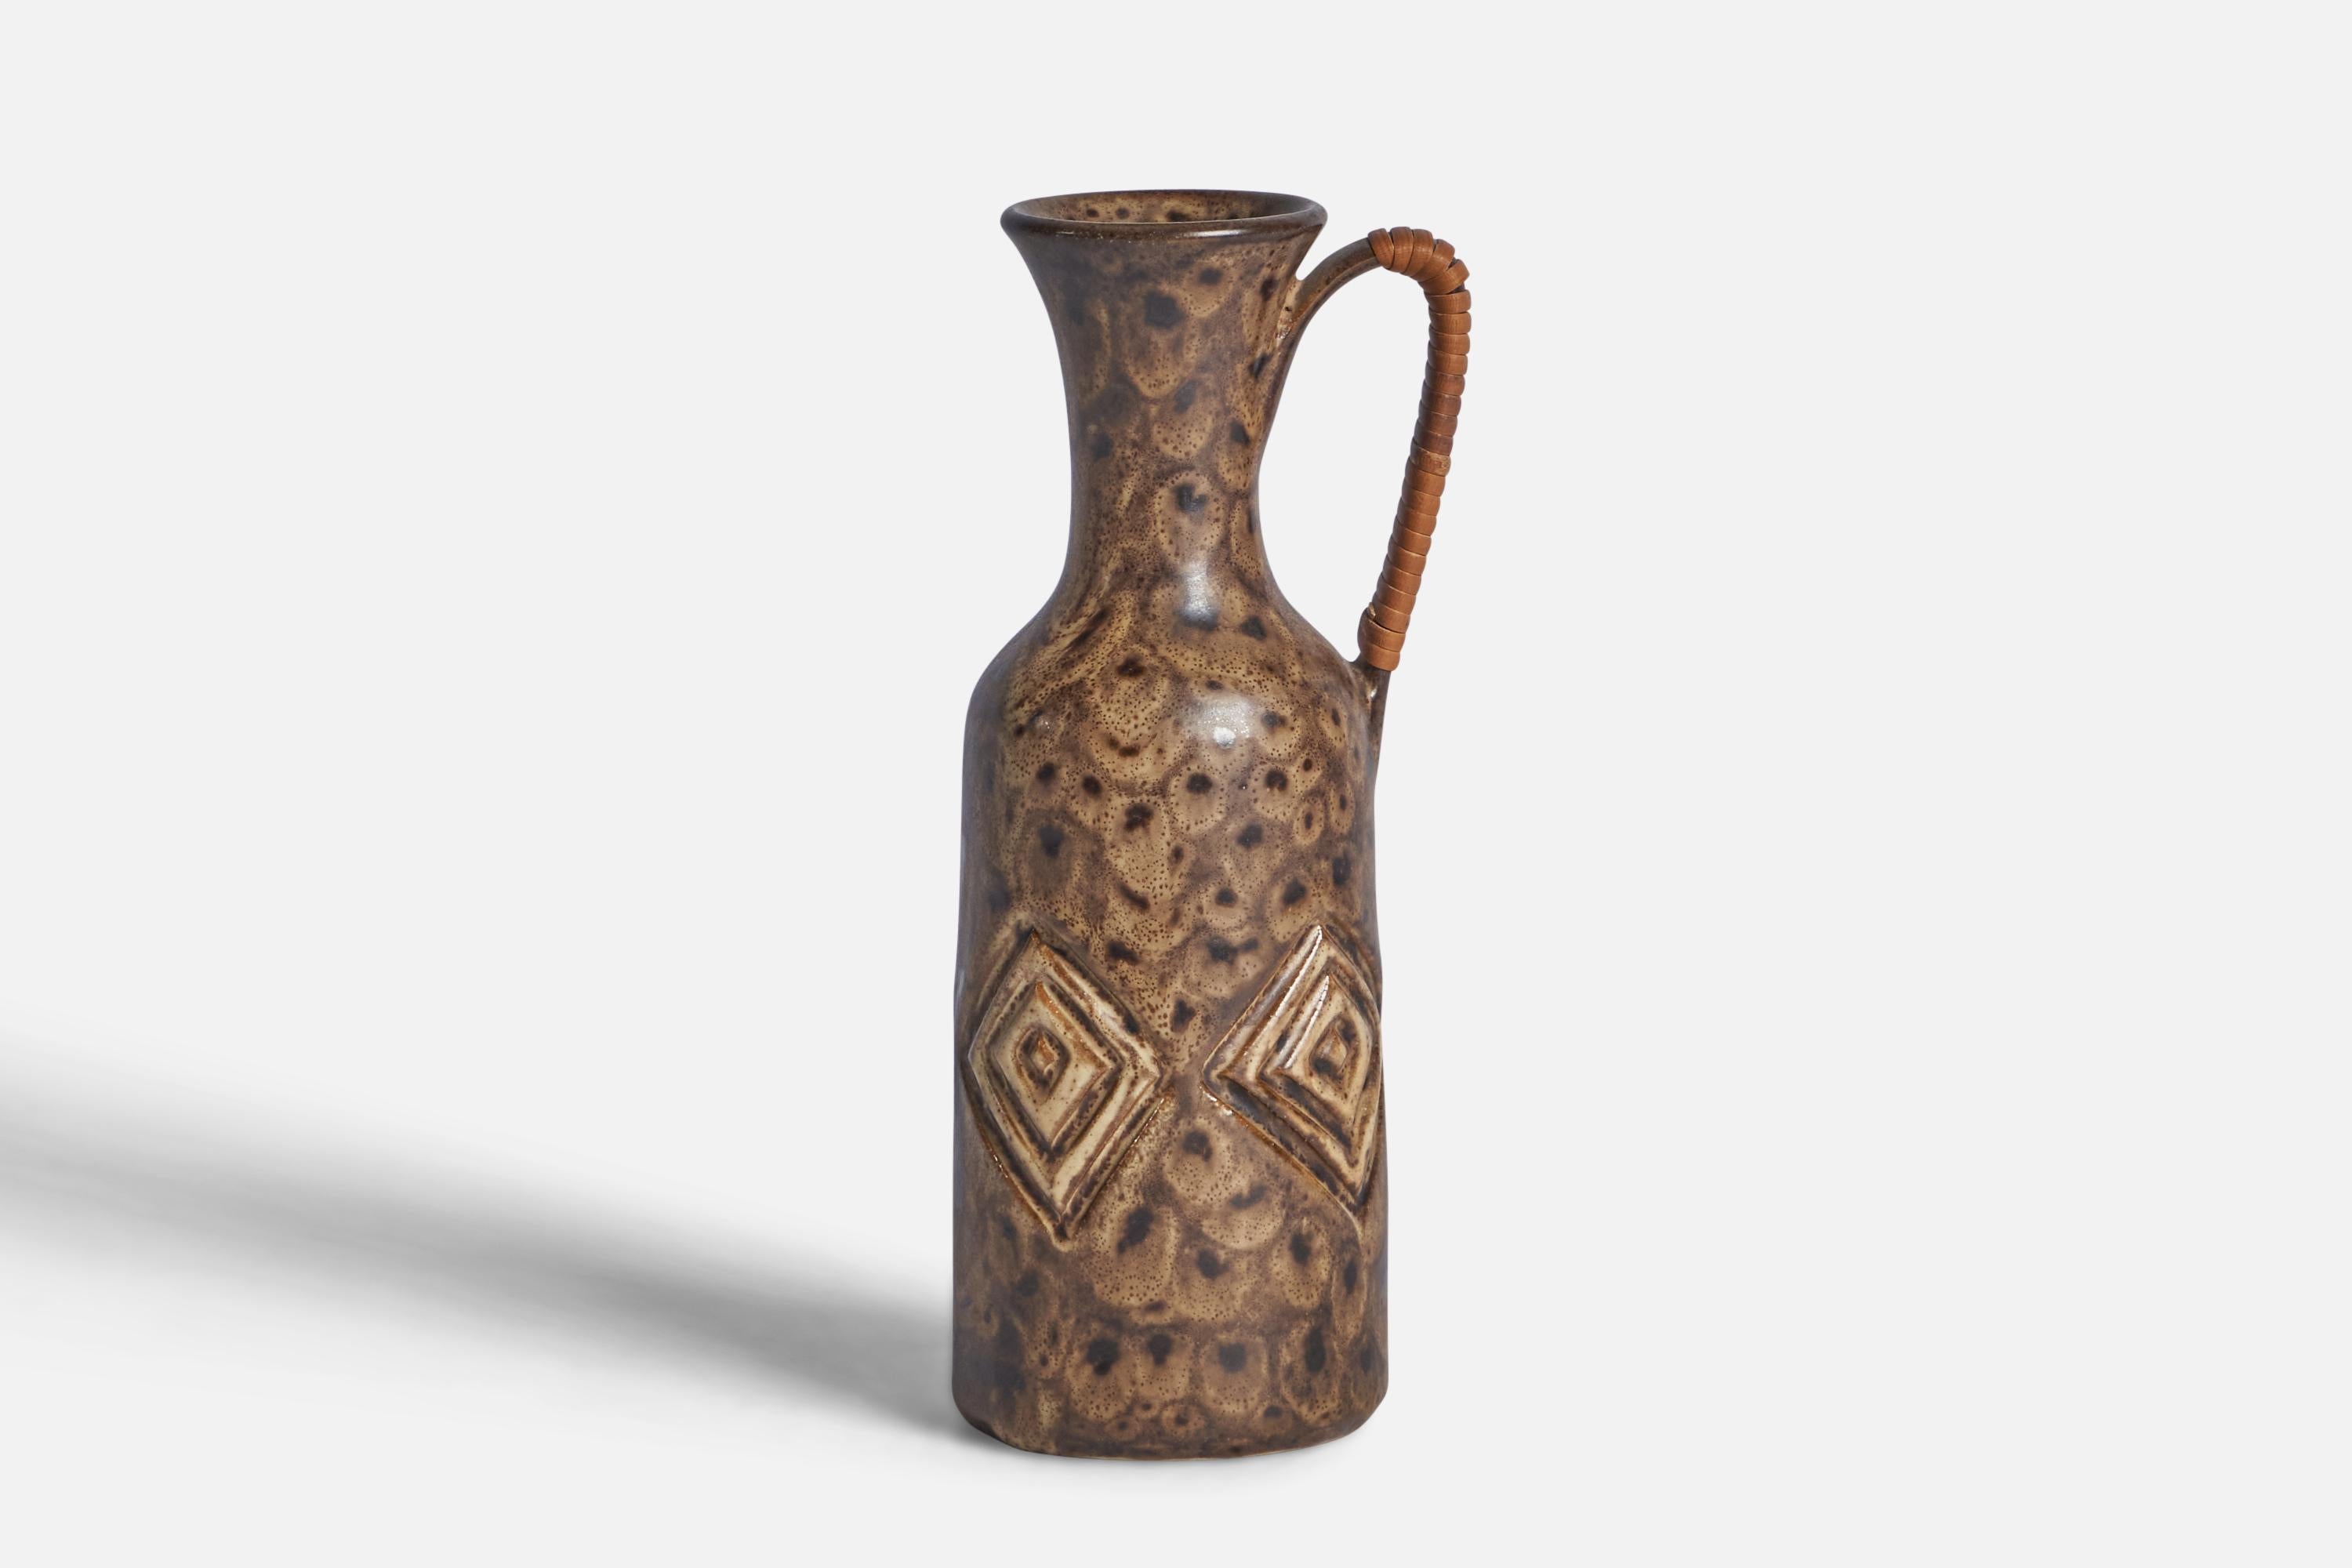 A brown-glazed incised stoneware pitcher designed and produced by Løvemose, Denmark, c. 1960s.